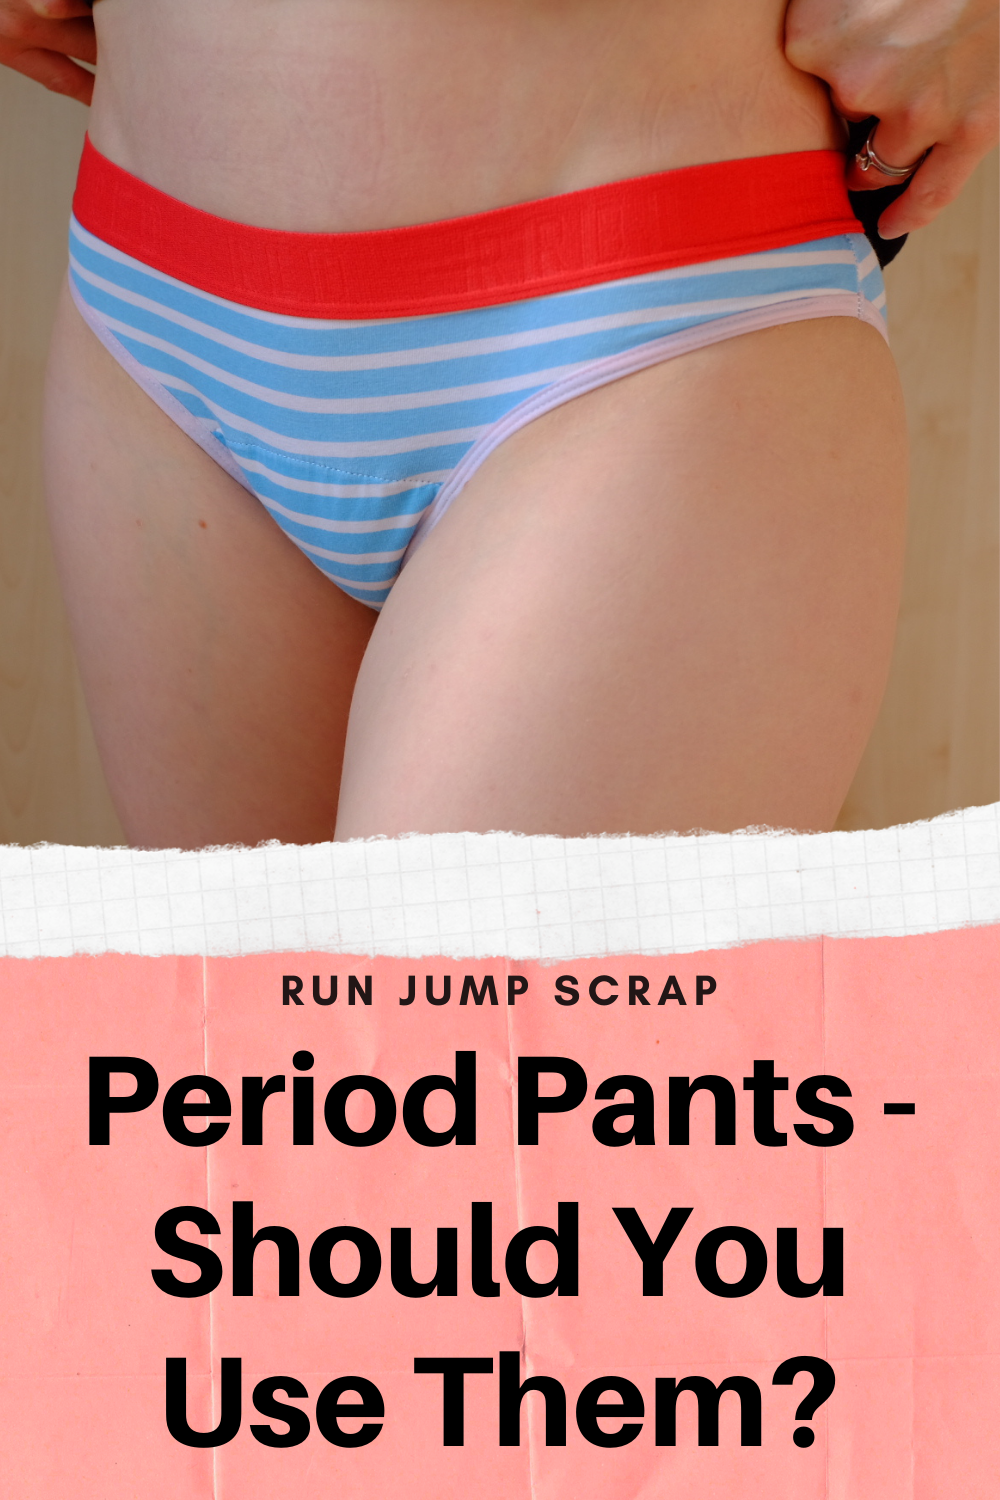 Period Pants should you use them